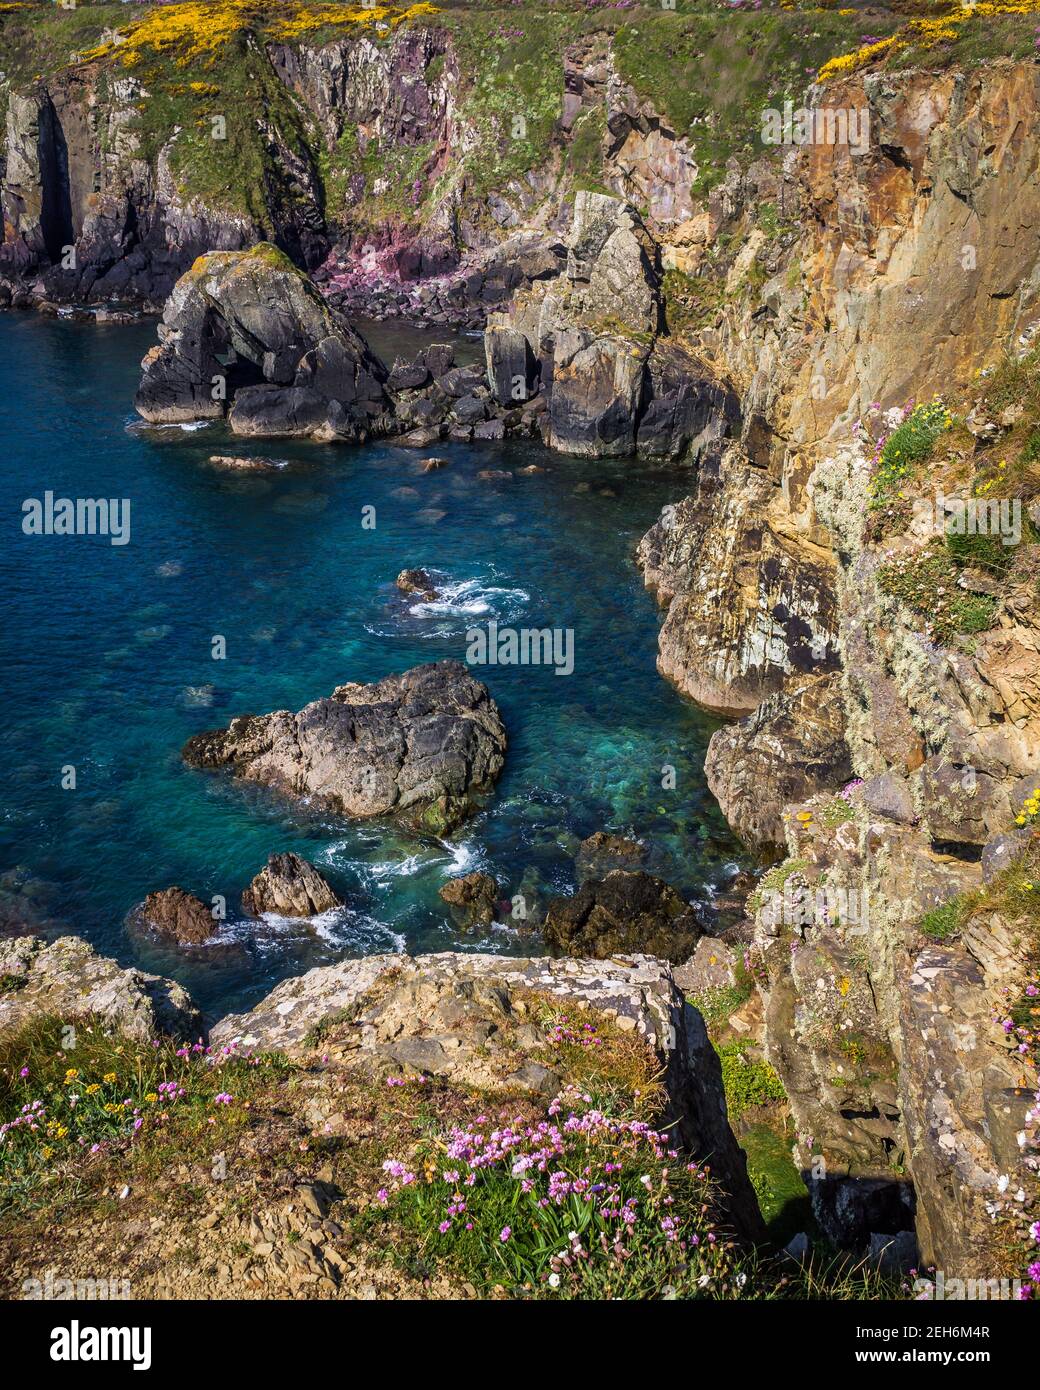 St Non's Bay in Pembrokeshire reputed to be the birthplace of St David. Sea Pink flowers grow on the cliffs. Stock Photo